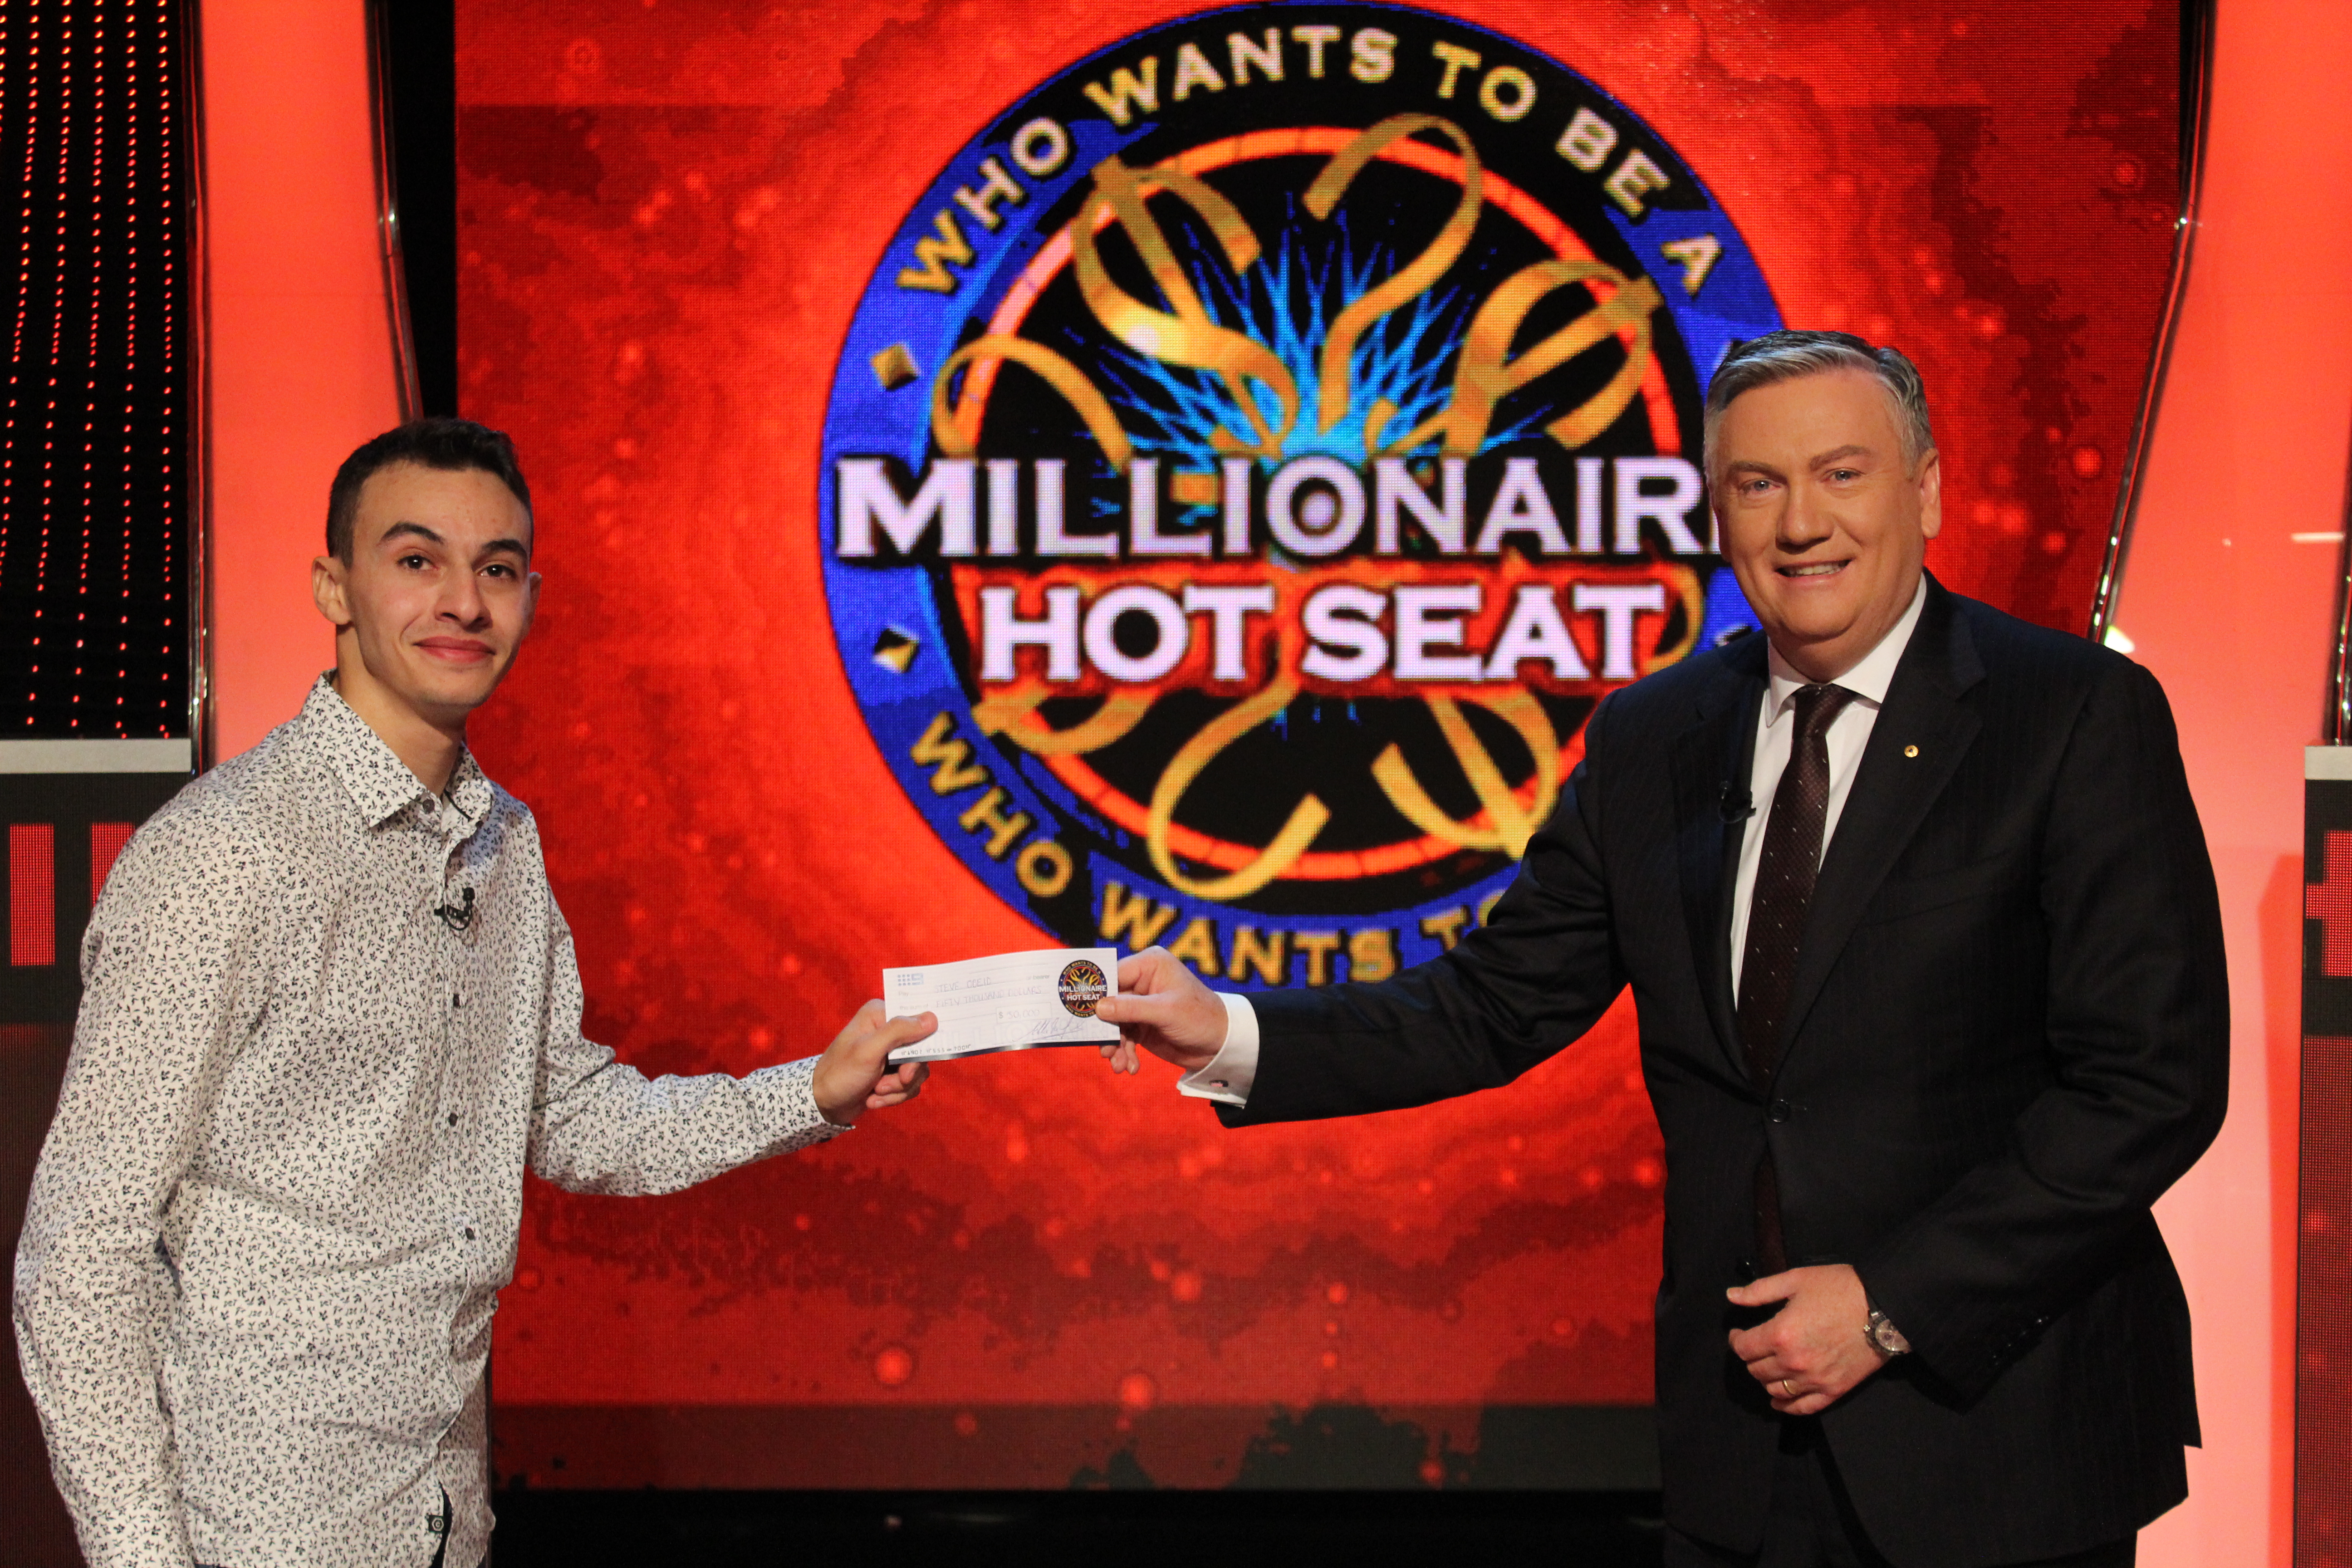 "Steve receiving his cheque from Eddie McGuire, host of Millionaire Hot Seat"